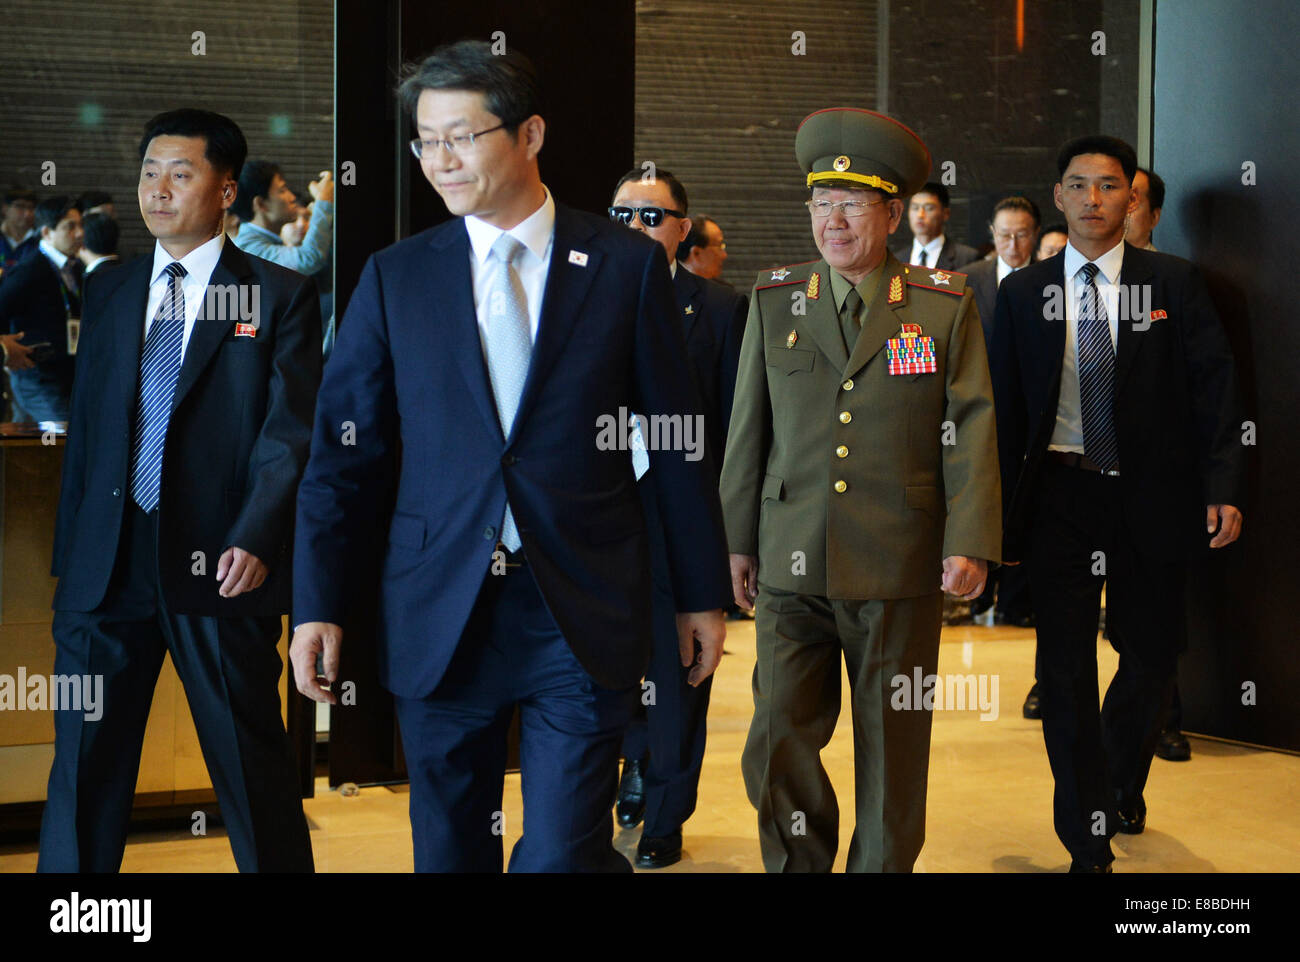 Incheon, South Korea. 4th Oct, 2014. Hwang Pyong So (2nd R, front), leader of the Democratic People's Republic of Korea (DPRK), leaves the hotel to meet DPRK athletes in Incheon, South Korea, Oct. 4, 2014. Credit:  Lu Zhe/Xinhua/Alamy Live News Stock Photo